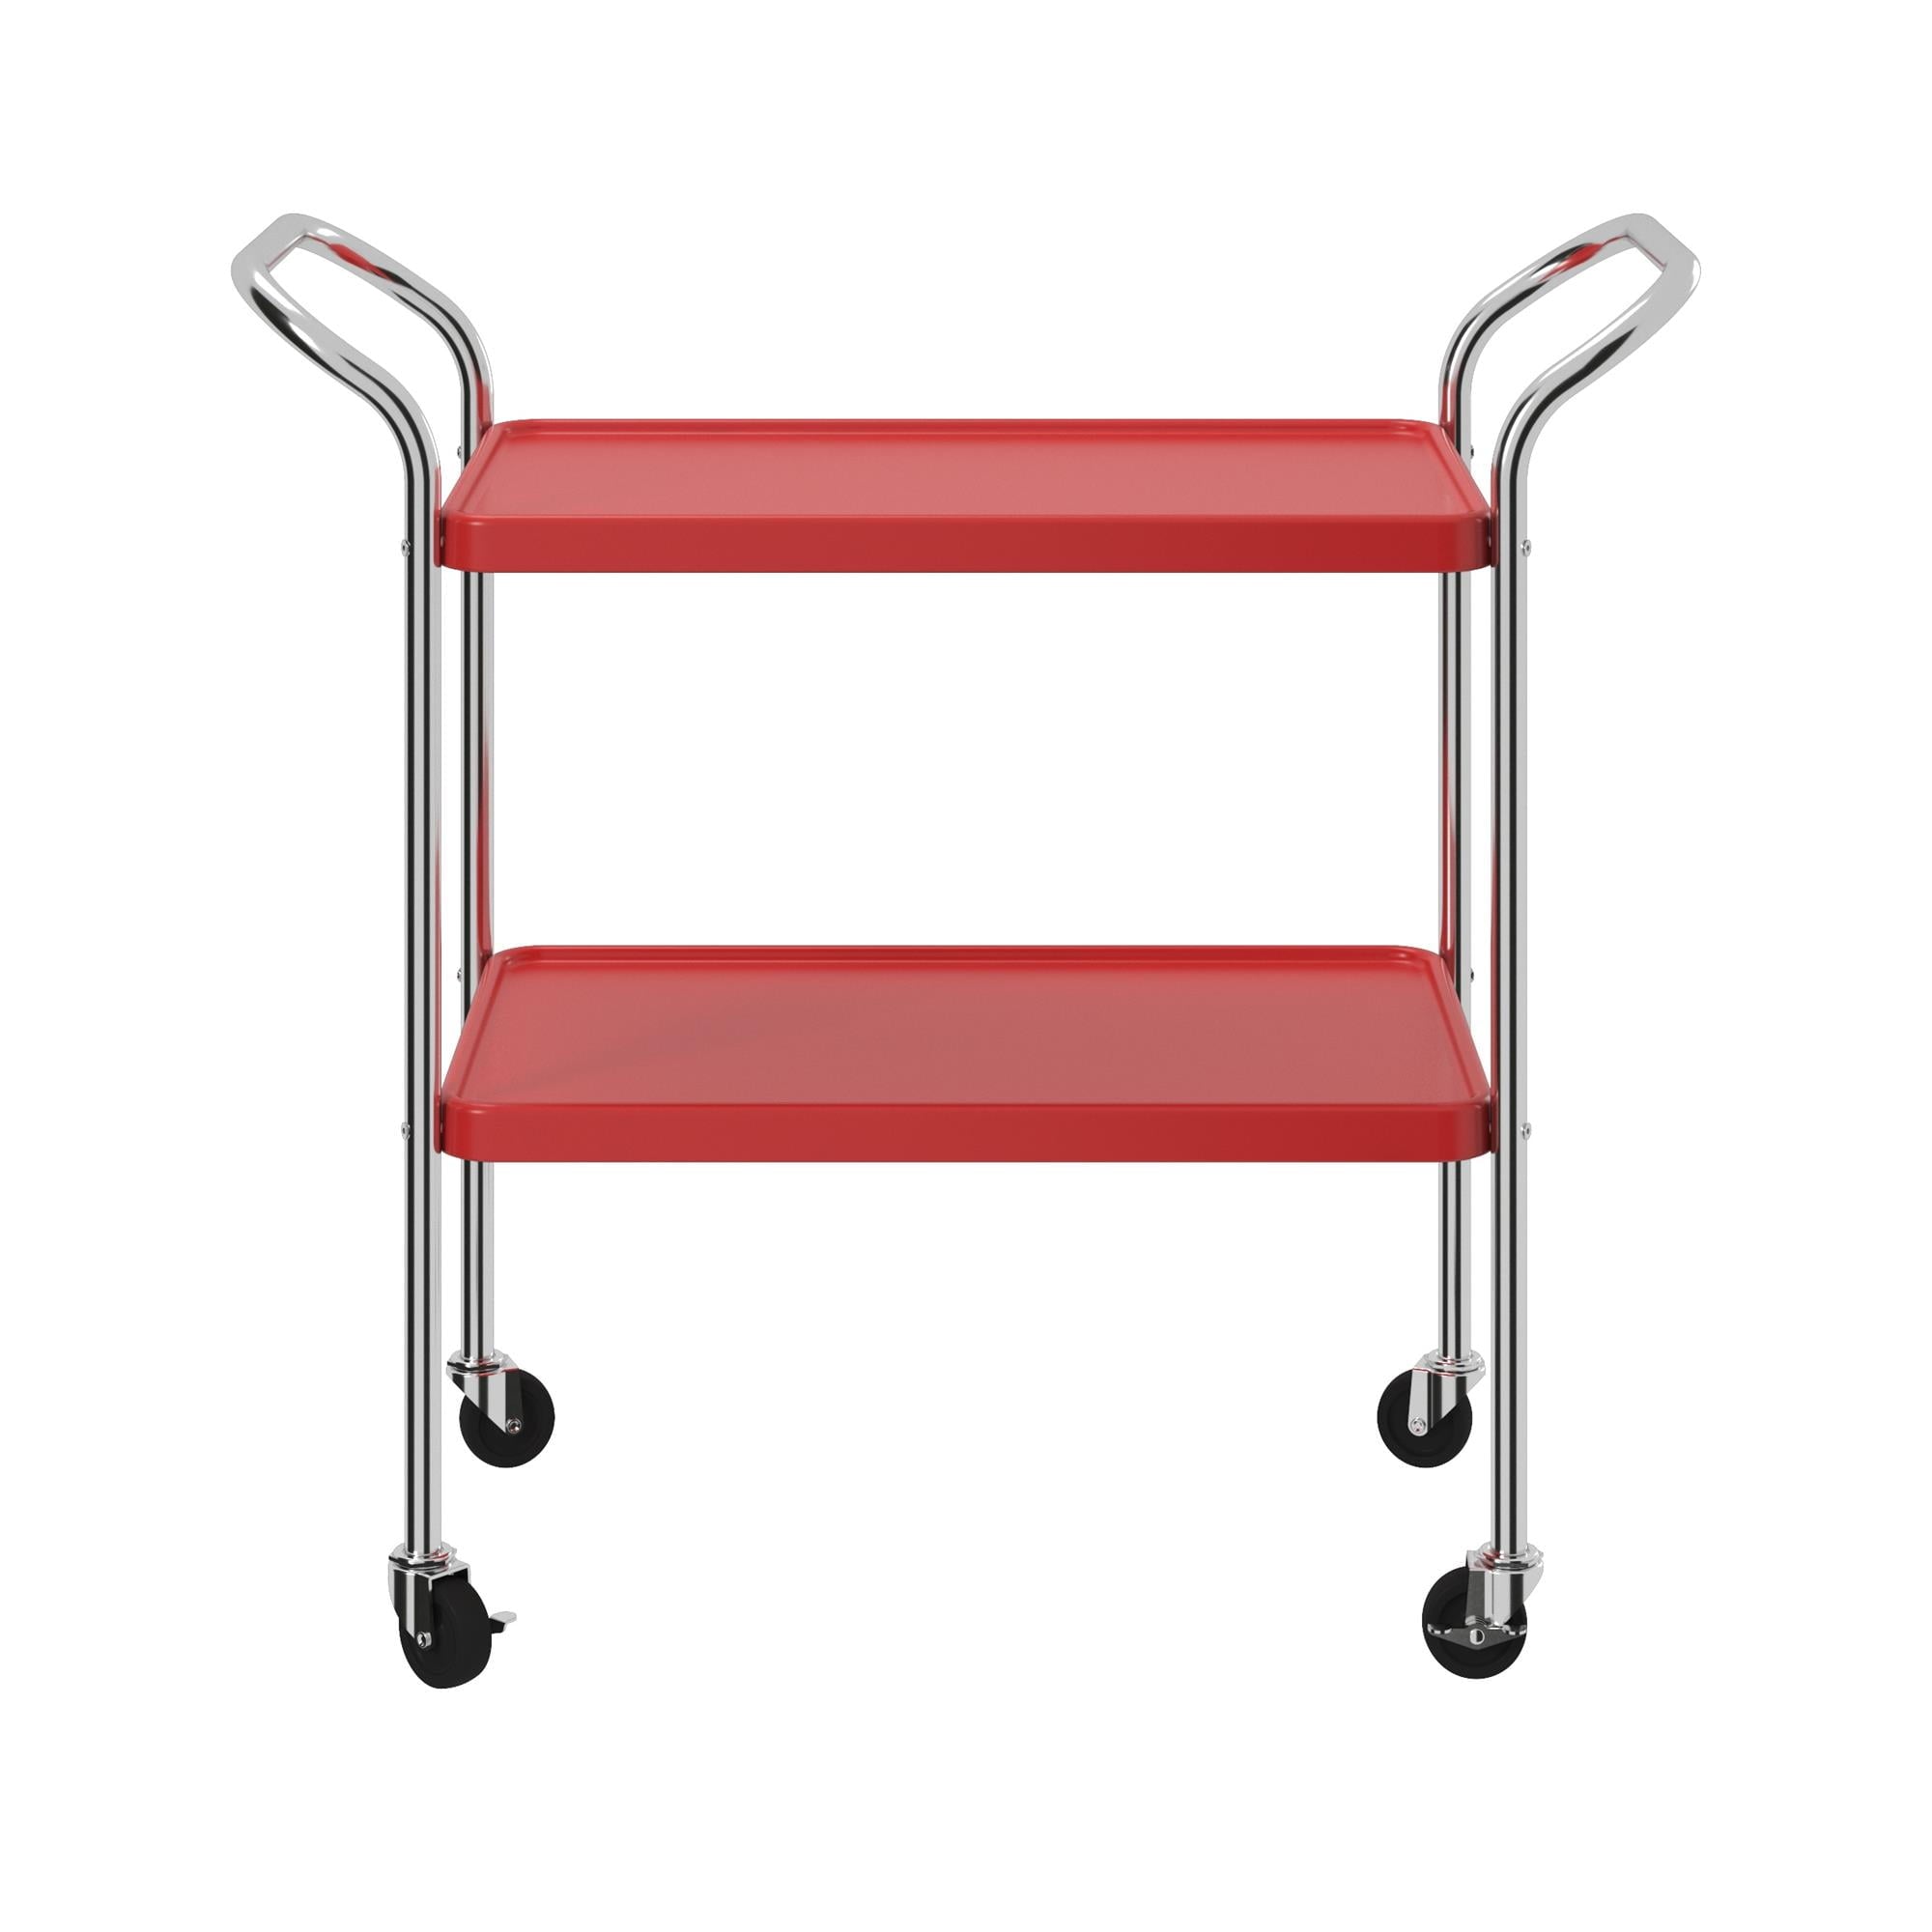 COSCO Stylaire 2 Tier Serving Cart, Red & Silver